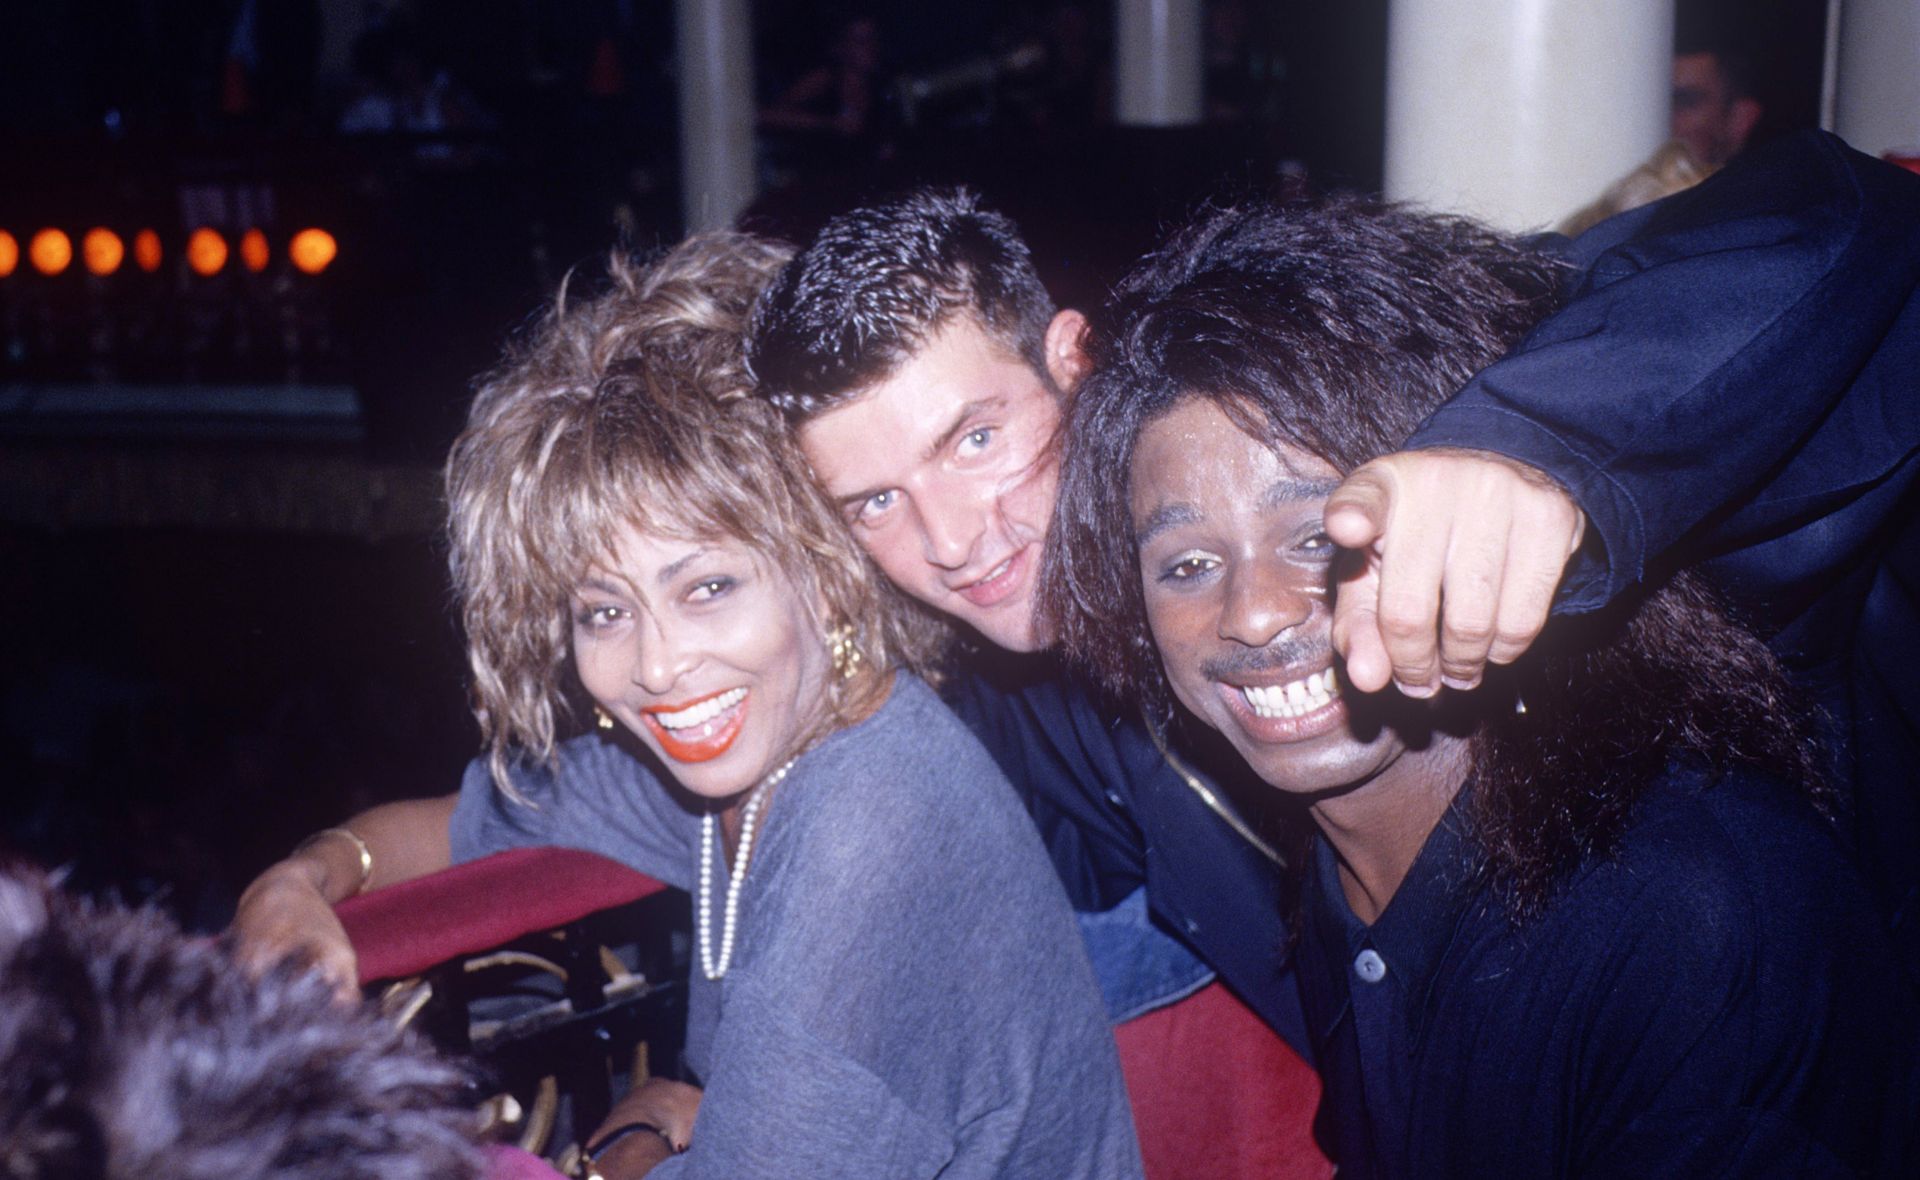 Tina Turner’s assistant, Eddy Armani, still feels connected to the icon after her passing